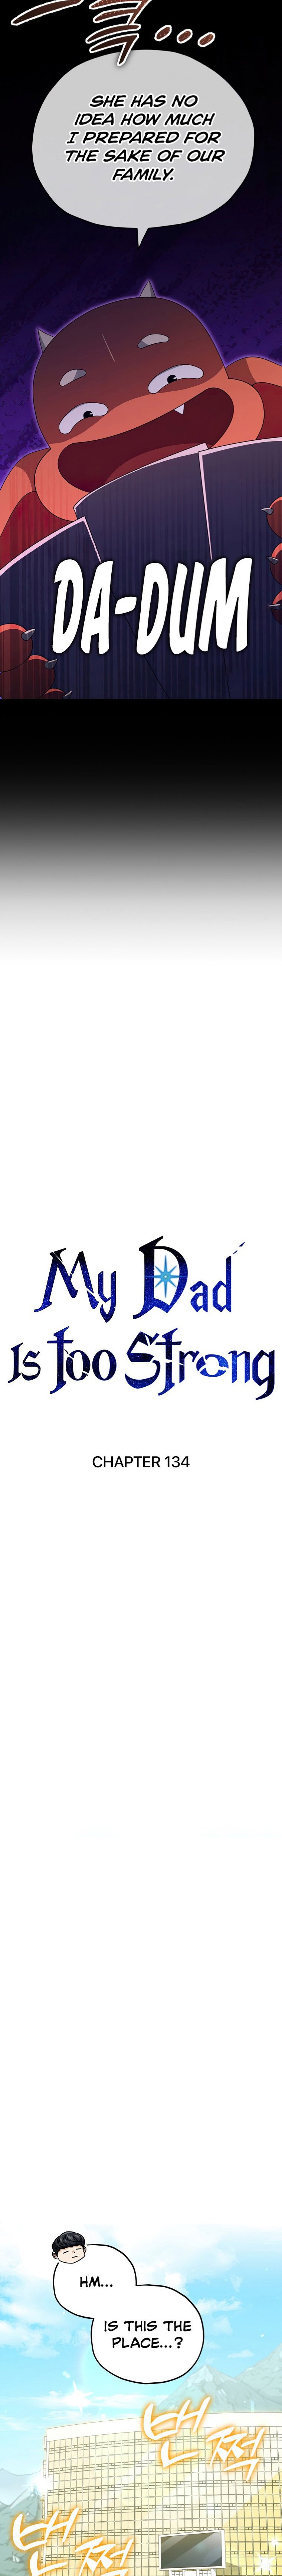 my-dad-is-too-strong-chap-134-1